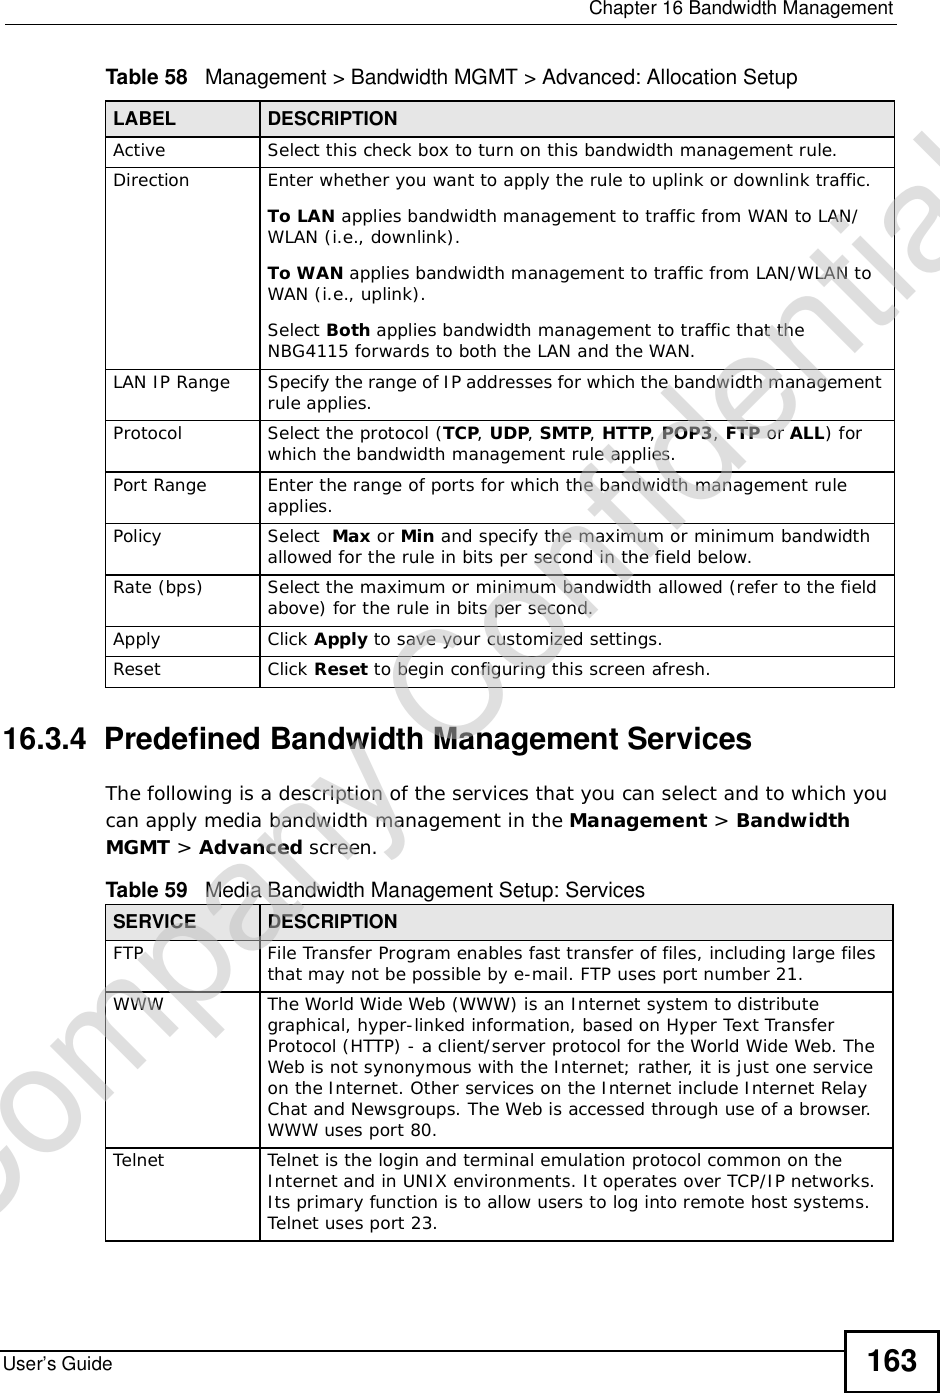  Chapter 16Bandwidth ManagementUser’s Guide 163Table 58   Management &gt; Bandwidth MGMT &gt; Advanced: Allocation Setup 16.3.4  Predefined Bandwidth Management ServicesThe following is a description of the services that you can select and to which you can apply media bandwidth management in the Management &gt; BandwidthMGMT &gt; Advanced screen.  LABEL DESCRIPTIONActive Select this check box to turn on this bandwidth management rule.Direction Enter whether you want to apply the rule to uplink or downlink traffic.To LAN applies bandwidth management to traffic from WAN to LAN/WLAN (i.e., downlink). To WAN applies bandwidth management to traffic from LAN/WLAN to WAN (i.e., uplink). Select Both applies bandwidth management to traffic that the NBG4115 forwards to both the LAN and the WAN. LAN IP Range Specify the range of IP addresses for which the bandwidth management rule applies. Protocol Select the protocol (TCP,UDP, SMTP, HTTP, POP3, FTP or ALL) for which the bandwidth management rule applies. Port Range Enter the range of ports for which the bandwidth management rule applies.Policy Select  Max or Min and specify the maximum or minimum bandwidth allowed for the rule in bits per second in the field below. Rate (bps) Select the maximum or minimum bandwidth allowed (refer to the field above) for the rule in bits per second.Apply Click Apply to save your customized settings.Reset Click Reset to begin configuring this screen afresh.Table 59   Media Bandwidth Management Setup: ServicesSERVICE DESCRIPTIONFTPFile Transfer Program enables fast transfer of files, including large files that may not be possible by e-mail. FTP uses port number 21.WWWThe World Wide Web (WWW) is an Internet system to distribute graphical, hyper-linked information, based on Hyper Text Transfer Protocol (HTTP) - a client/server protocol for the World Wide Web. The Web is not synonymous with the Internet; rather, it is just one service on the Internet. Other services on the Internet include Internet Relay Chat and Newsgroups. The Web is accessed through use of a browser. WWW uses port 80.TelnetTelnet is the login and terminal emulation protocol common on the Internet and in UNIX environments. It operates over TCP/IP networks. Its primary function is to allow users to log into remote host systems. Telnet uses port 23.Company Confidential